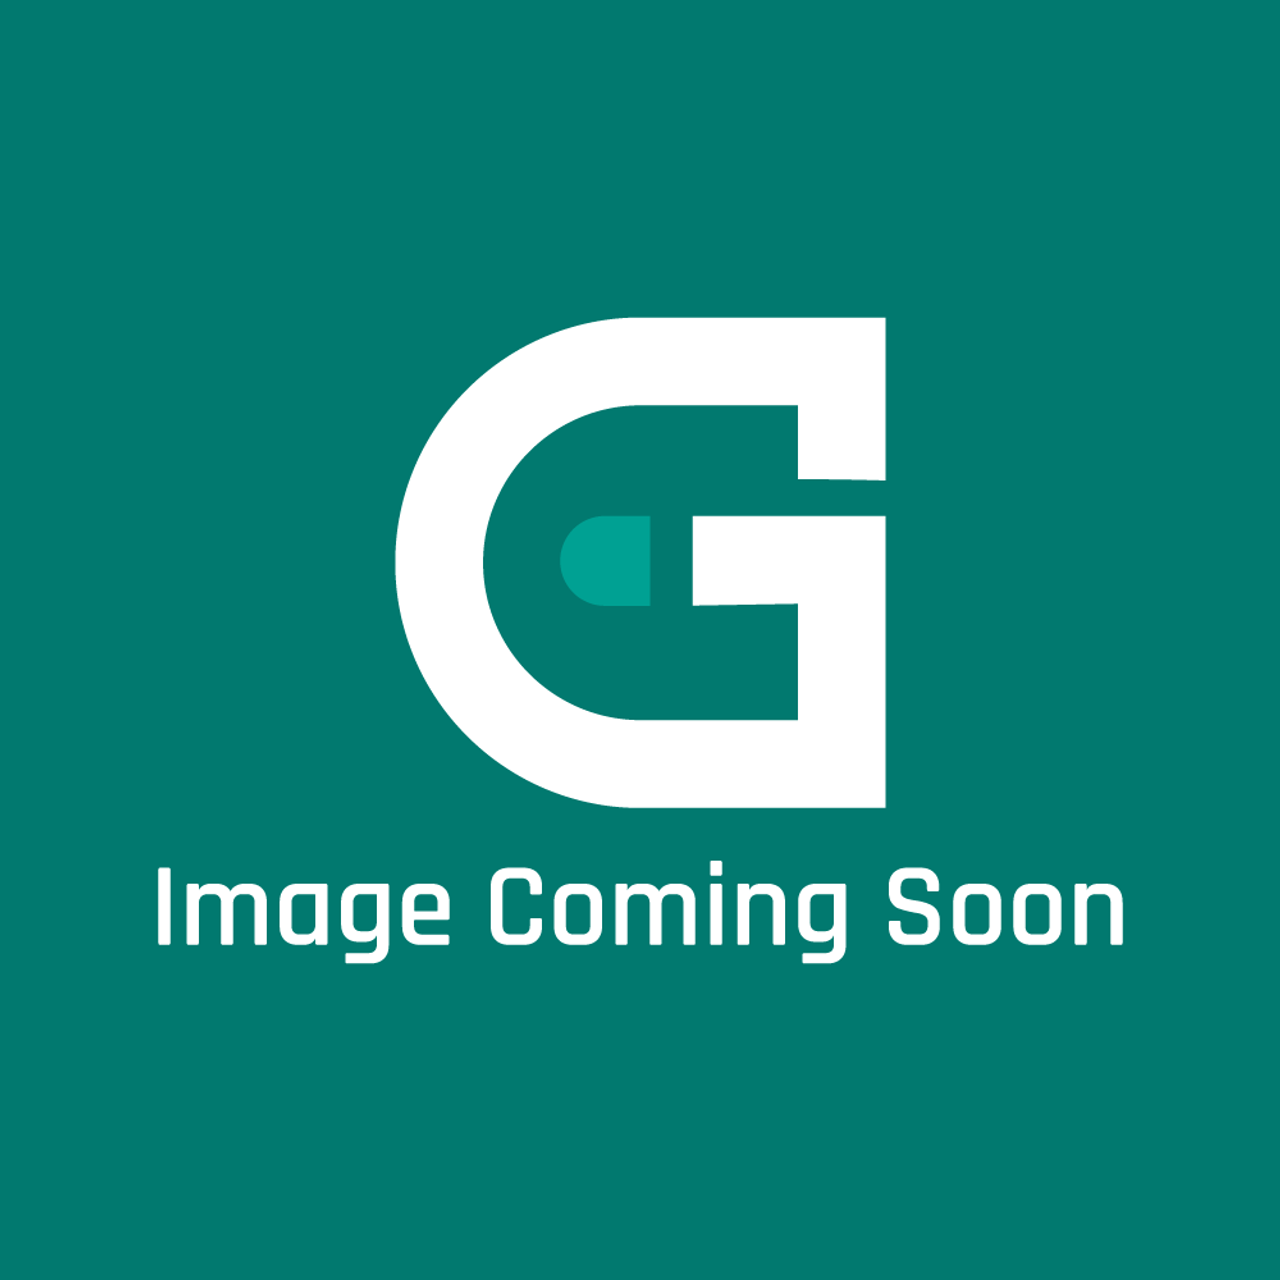 GE Appliances WH09X22745 - O-RING - Image Coming Soon!